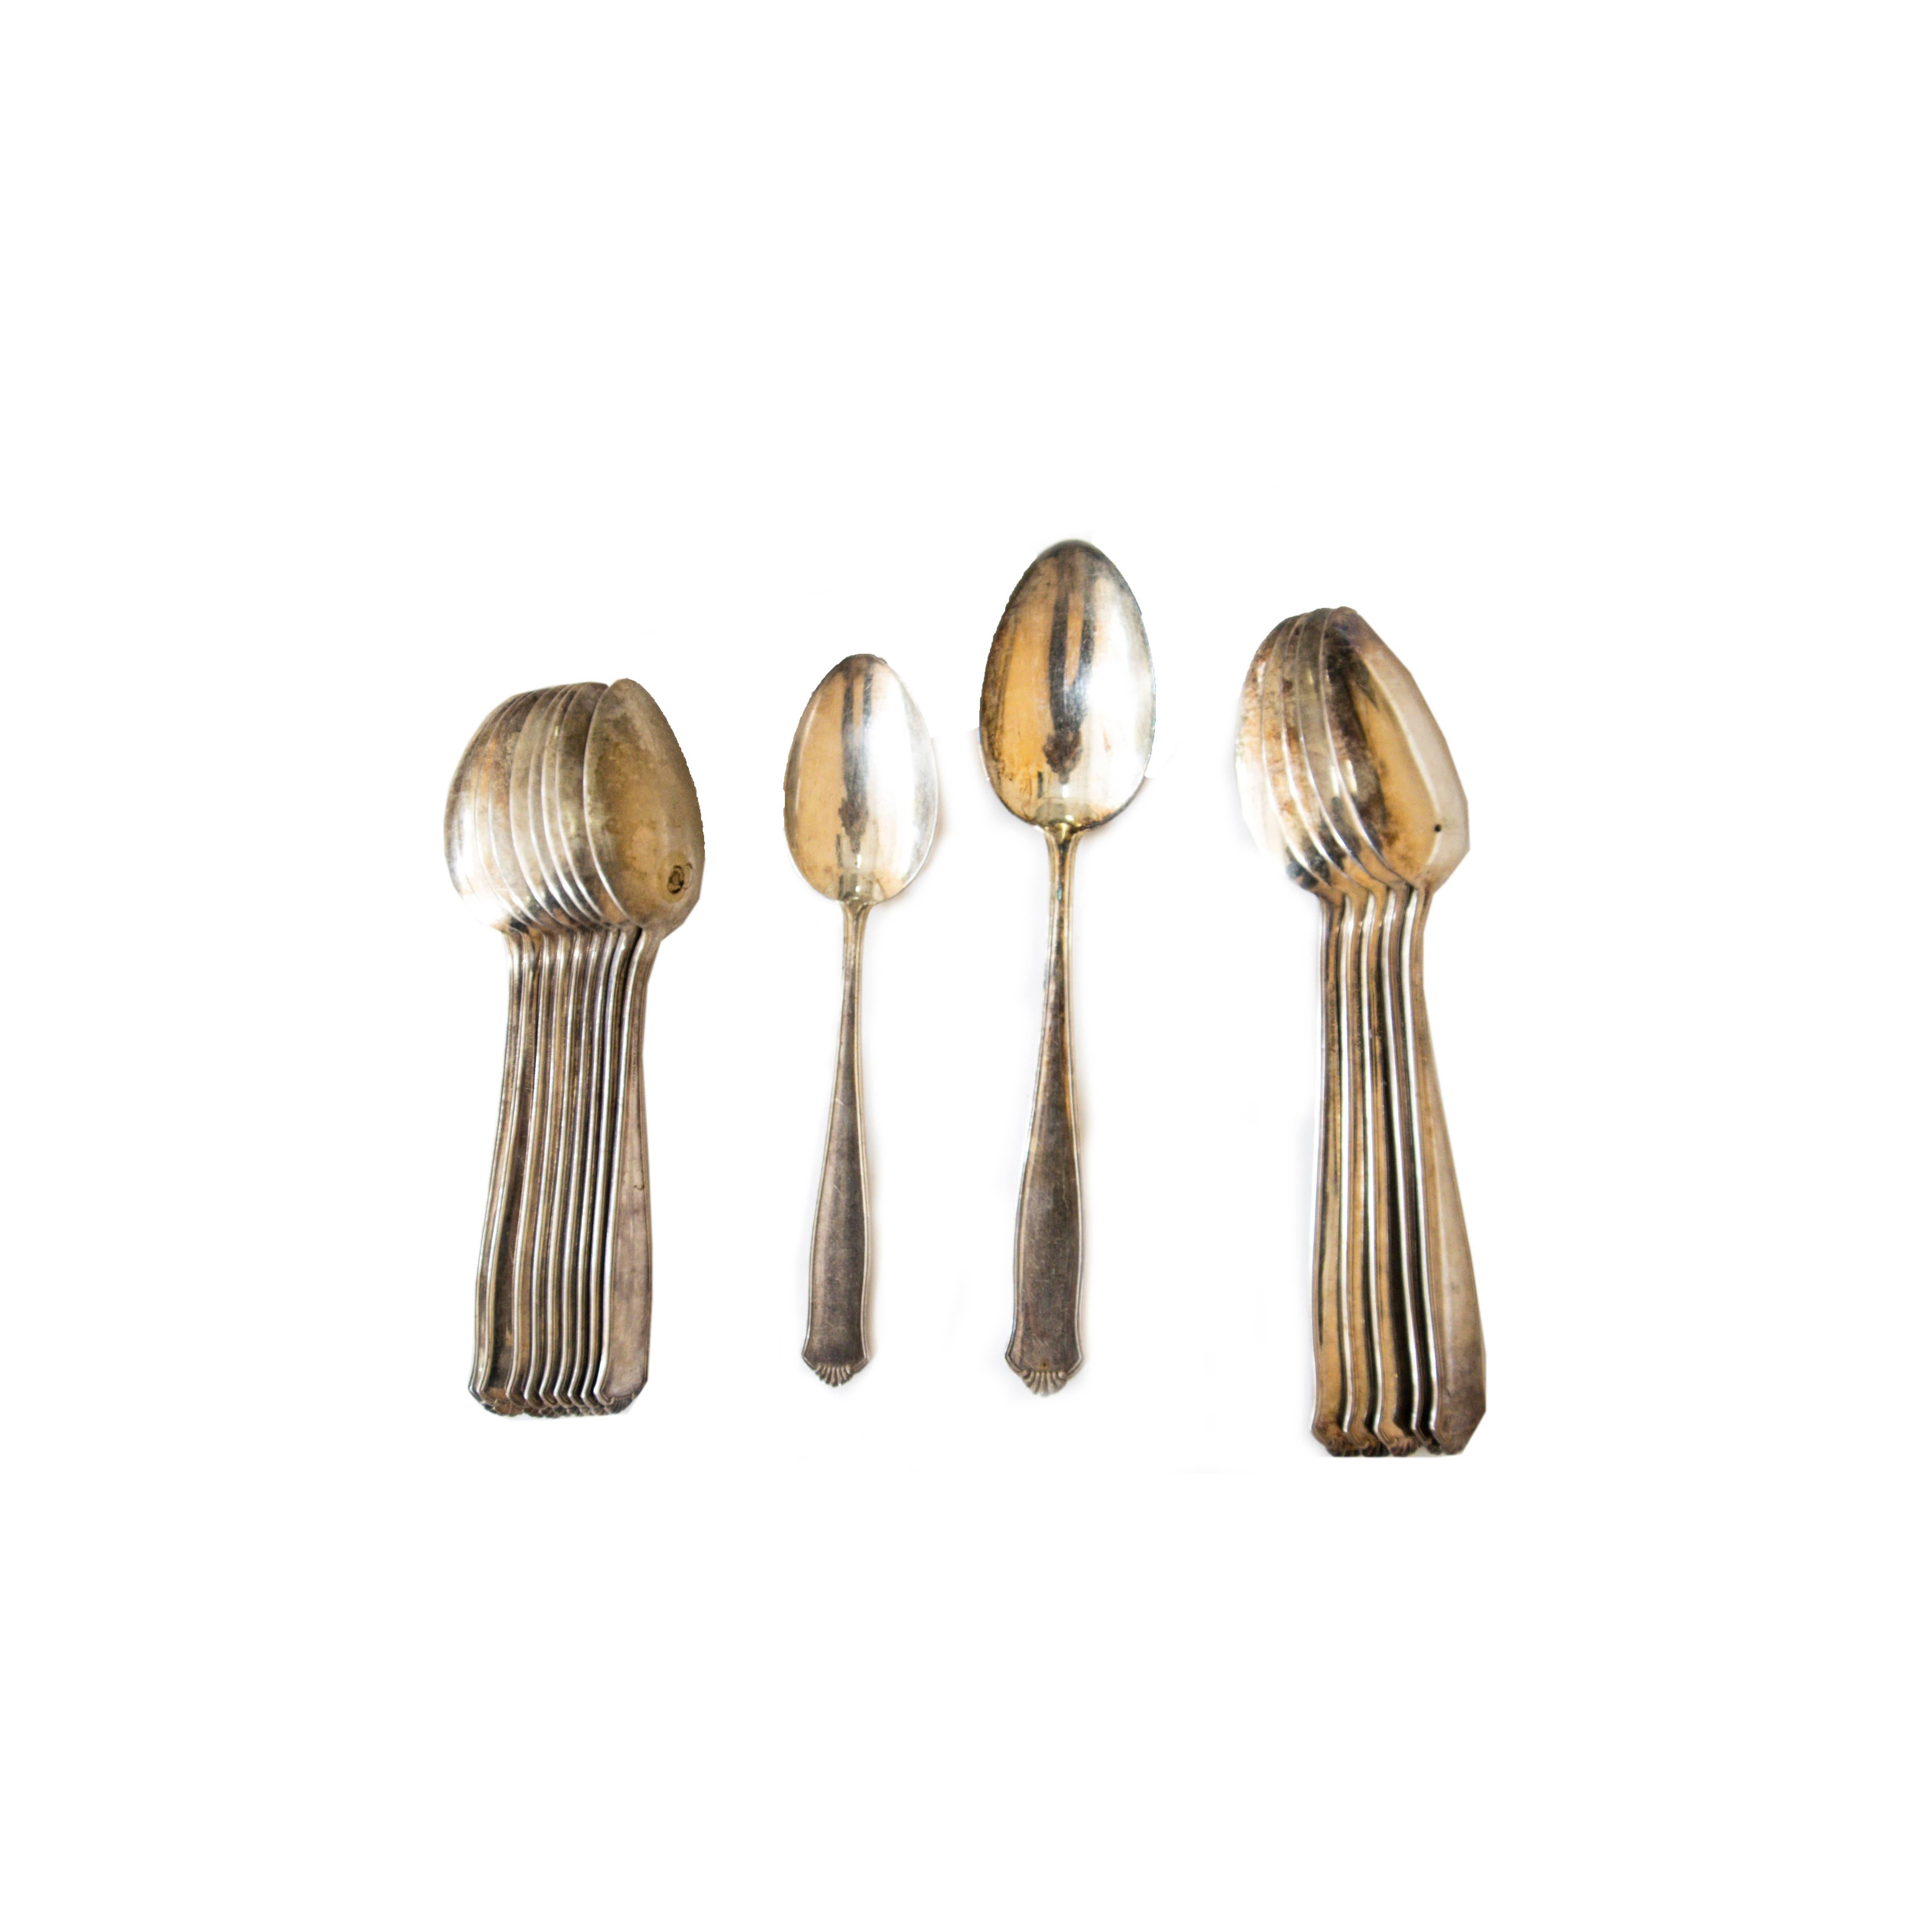 Silver Plate Antique Silver Cutlery with Stunning Embossed Patterns from WMA Rogers Sectional For Sale